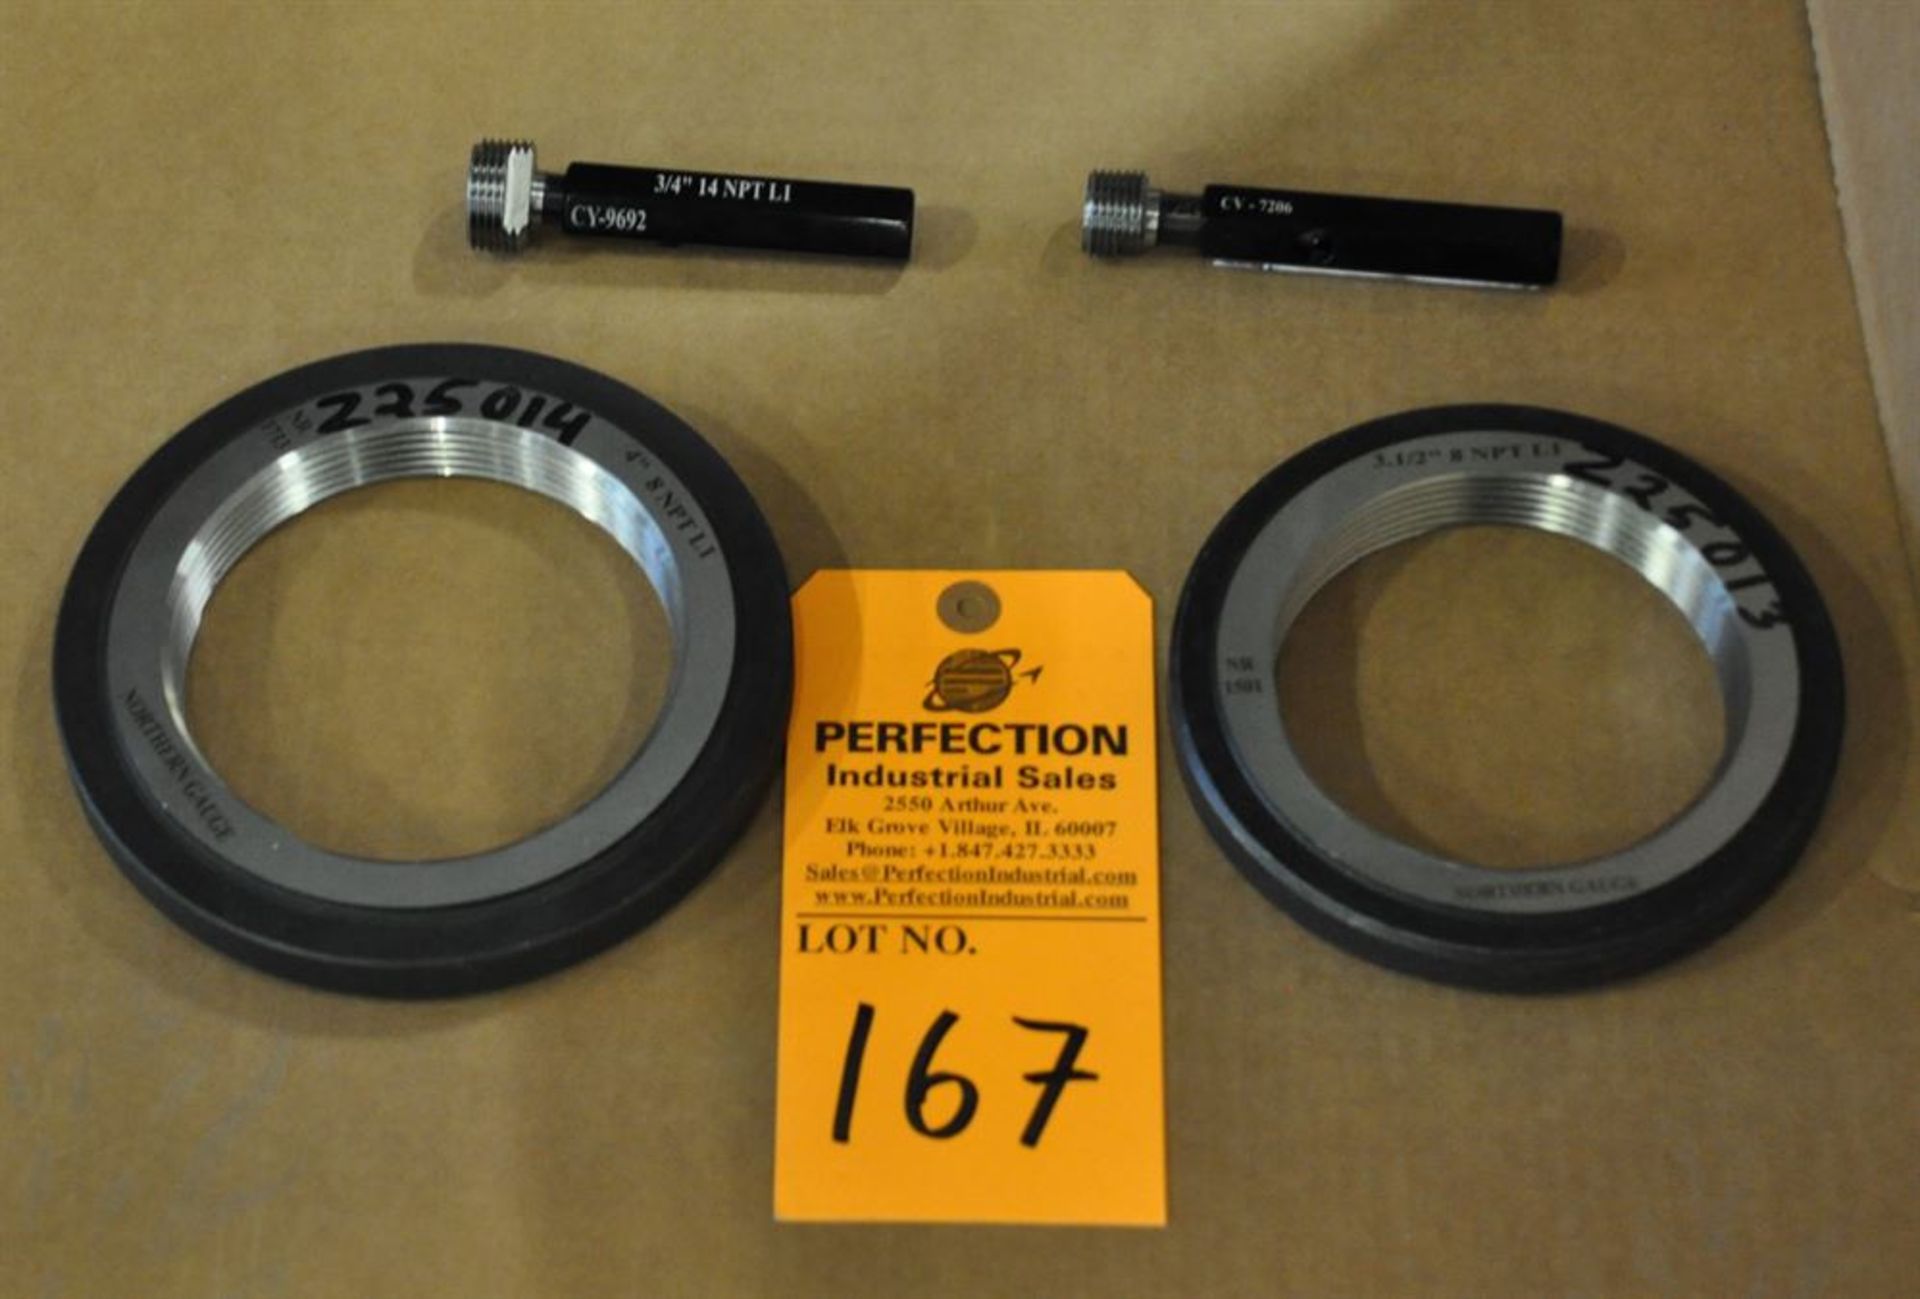 Assorted NPT ring and plug gages